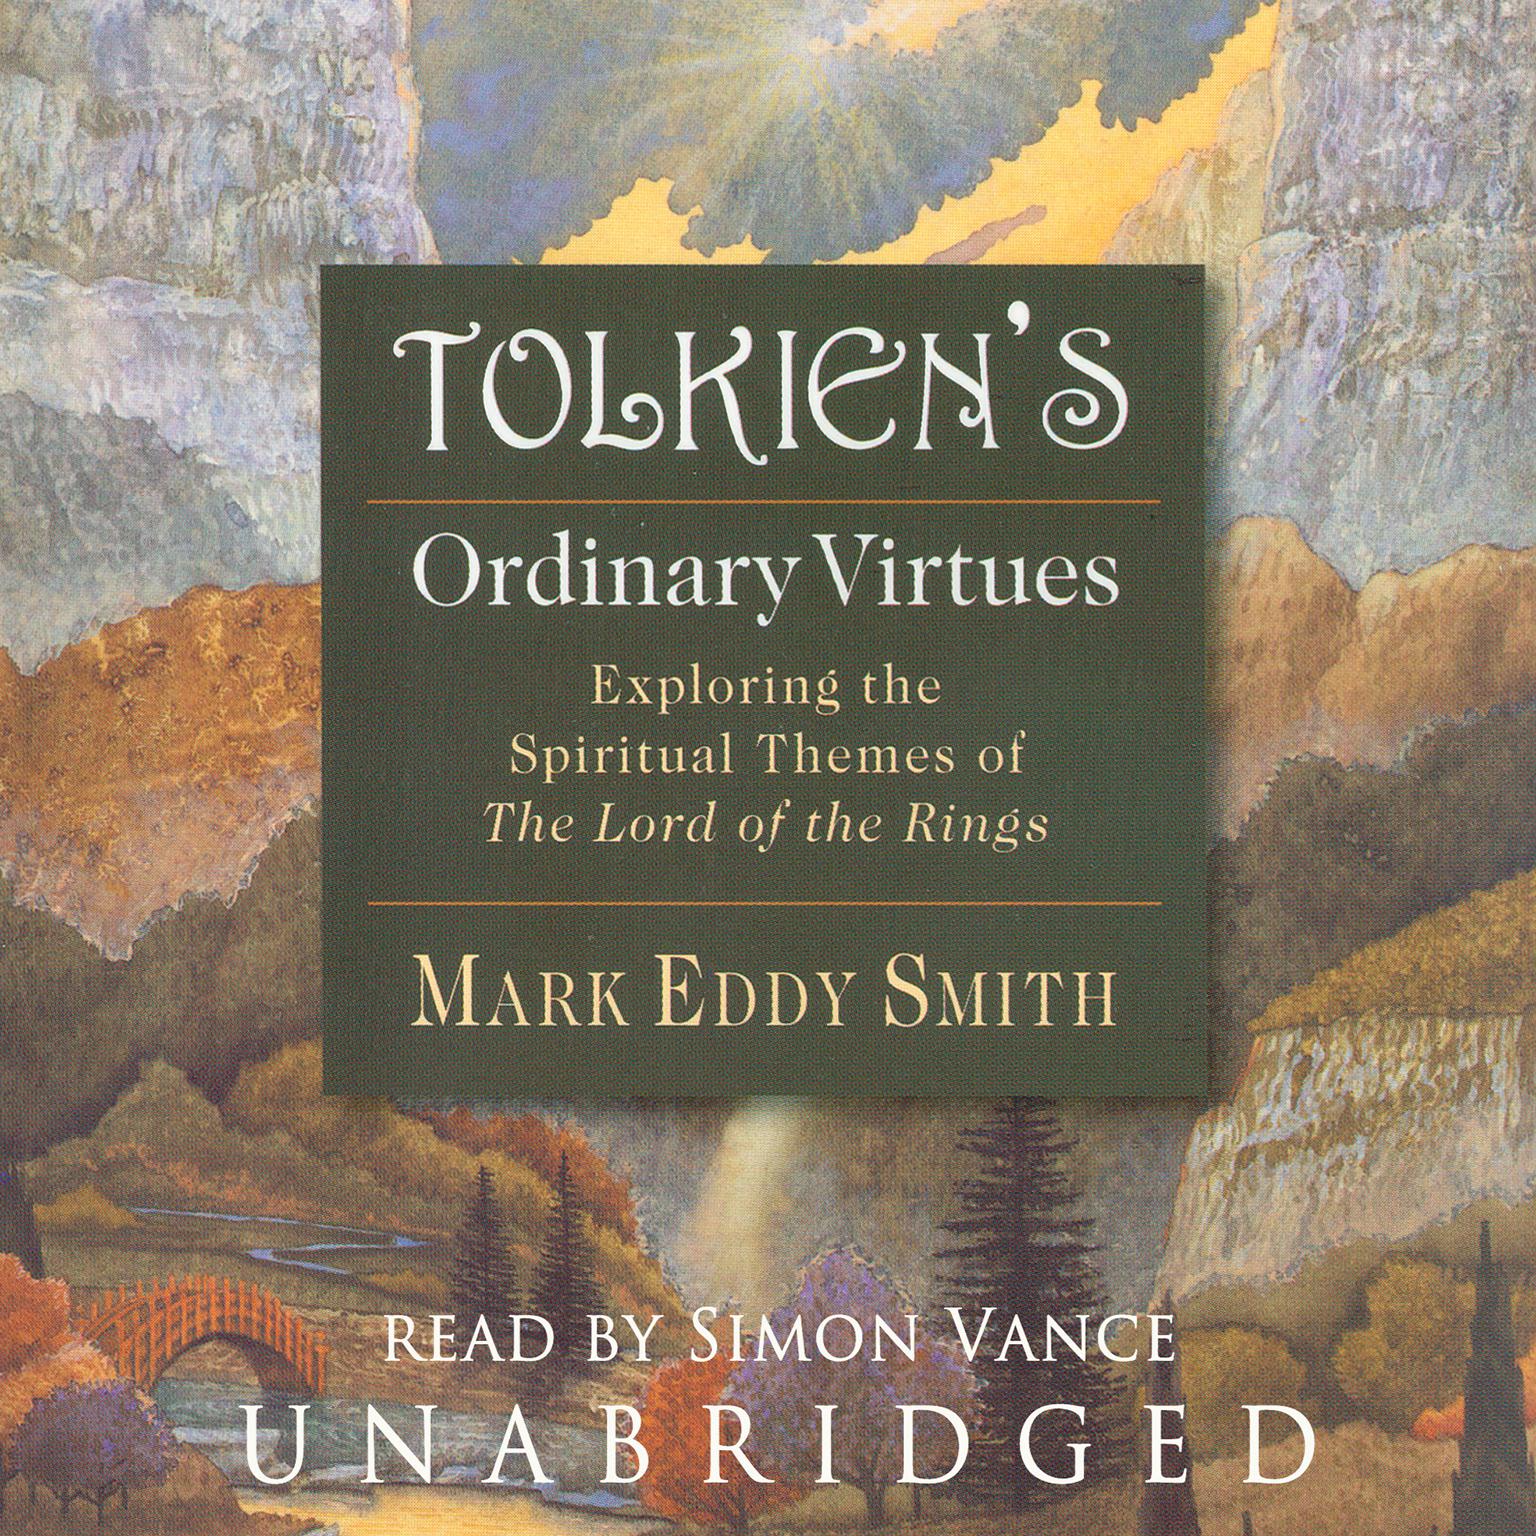 Tolkien’s Ordinary Virtues: Exploring the Spiritual Themes of The Lord of the Rings Audiobook, by Mark Eddy Smith